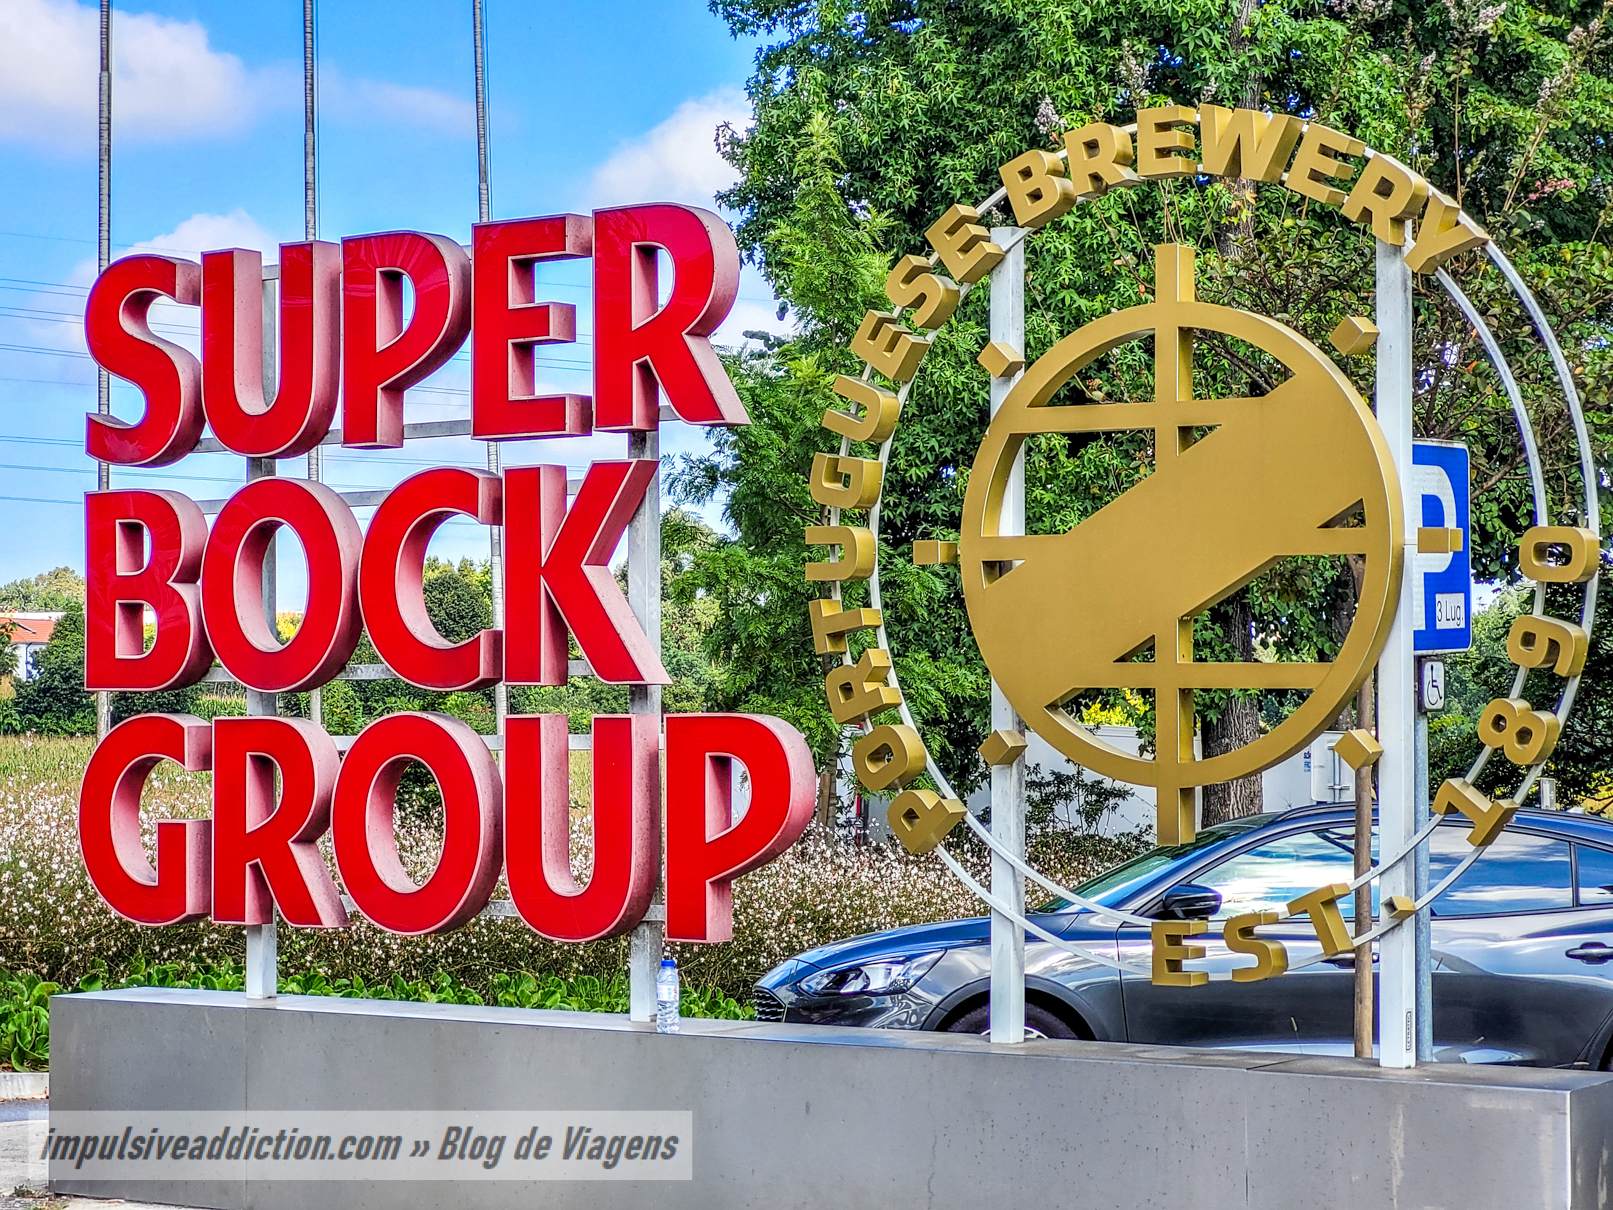 Entrance to the Super Bock factory